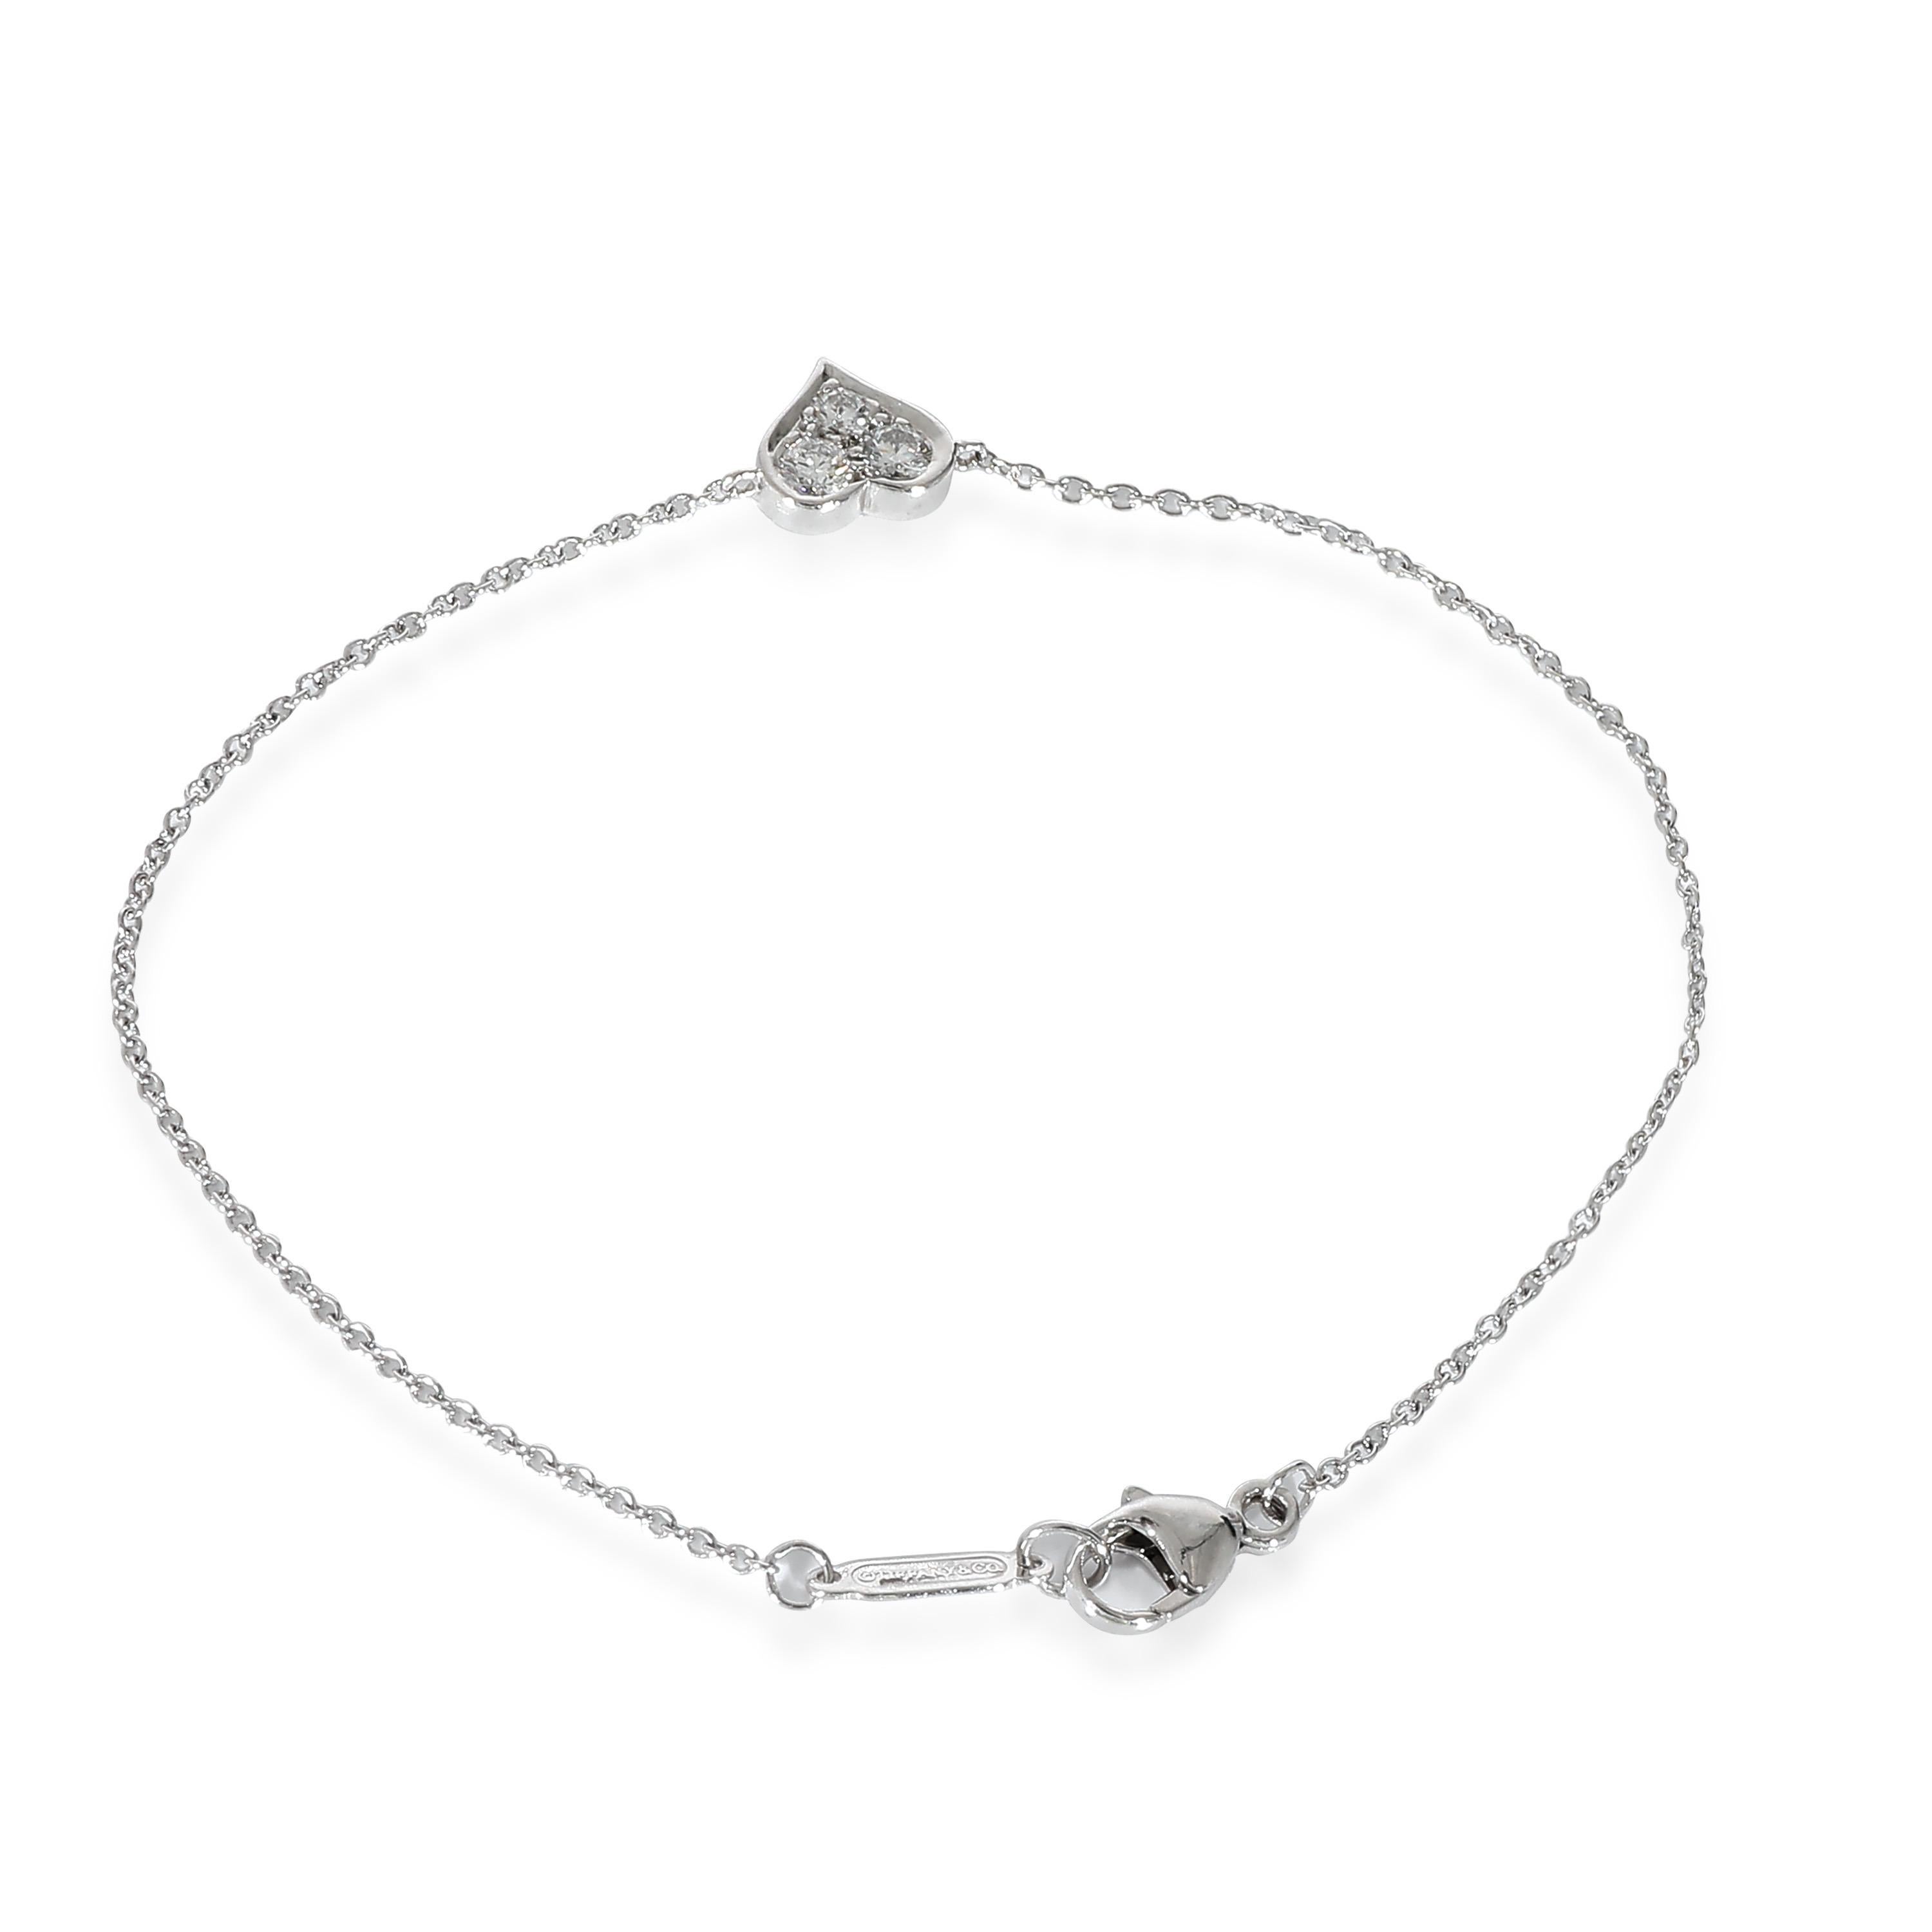 Tiffany & Co. 3 Stone Diamond Heart Bracelet in  Platinum 0.18 CTW

PRIMARY DETAILS
SKU: 134759
Listing Title: Tiffany & Co. 3 Stone Diamond Heart Bracelet in  Platinum 0.18 CTW
Condition Description: Retails for 1600 USD. In excellent condition and